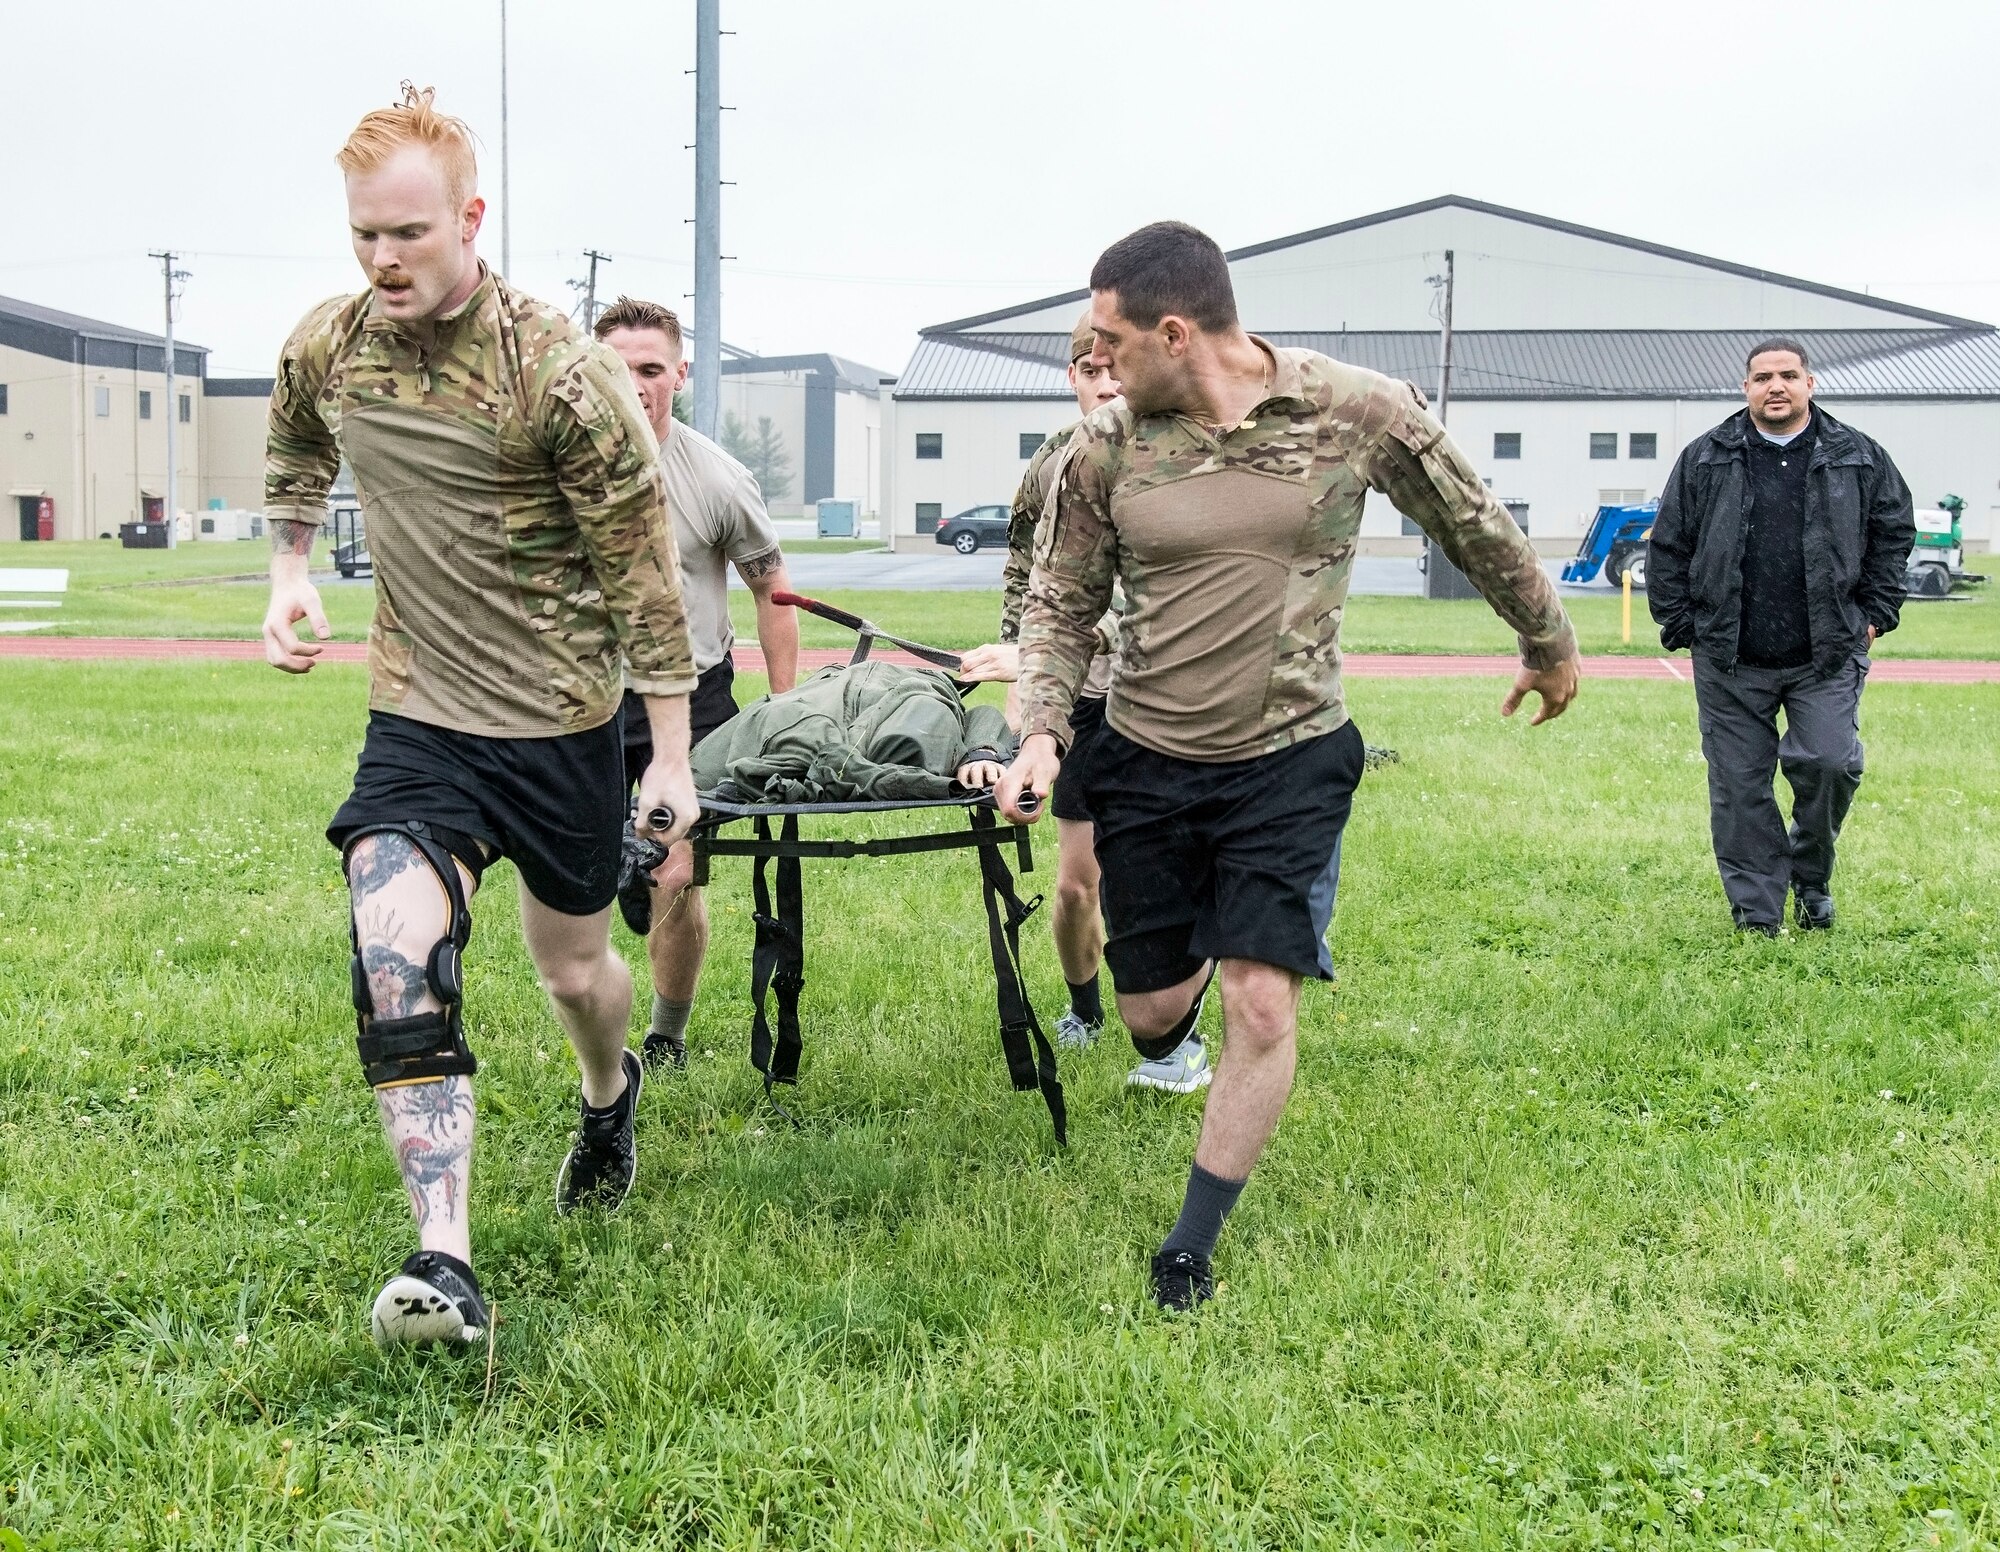 Detective Alex Gonzalez (back right) watches Senior Airman Donald Maas and Airman 1st Class John Paul Zografos, front left to right, followed by Airman 1st Class Hunter Mowery and Jake Goff, rear left to right, all from the 436th Security Forces Squadron, perform the “Rescue Randy Pull” during the Police Week Combat Fitness Challenge May 17, 2018, at Dover Air Force Base, Del. The team finished in first place with a time of 5 minutes and 13 seconds. (U.S. Air Force photo by Roland Balik)